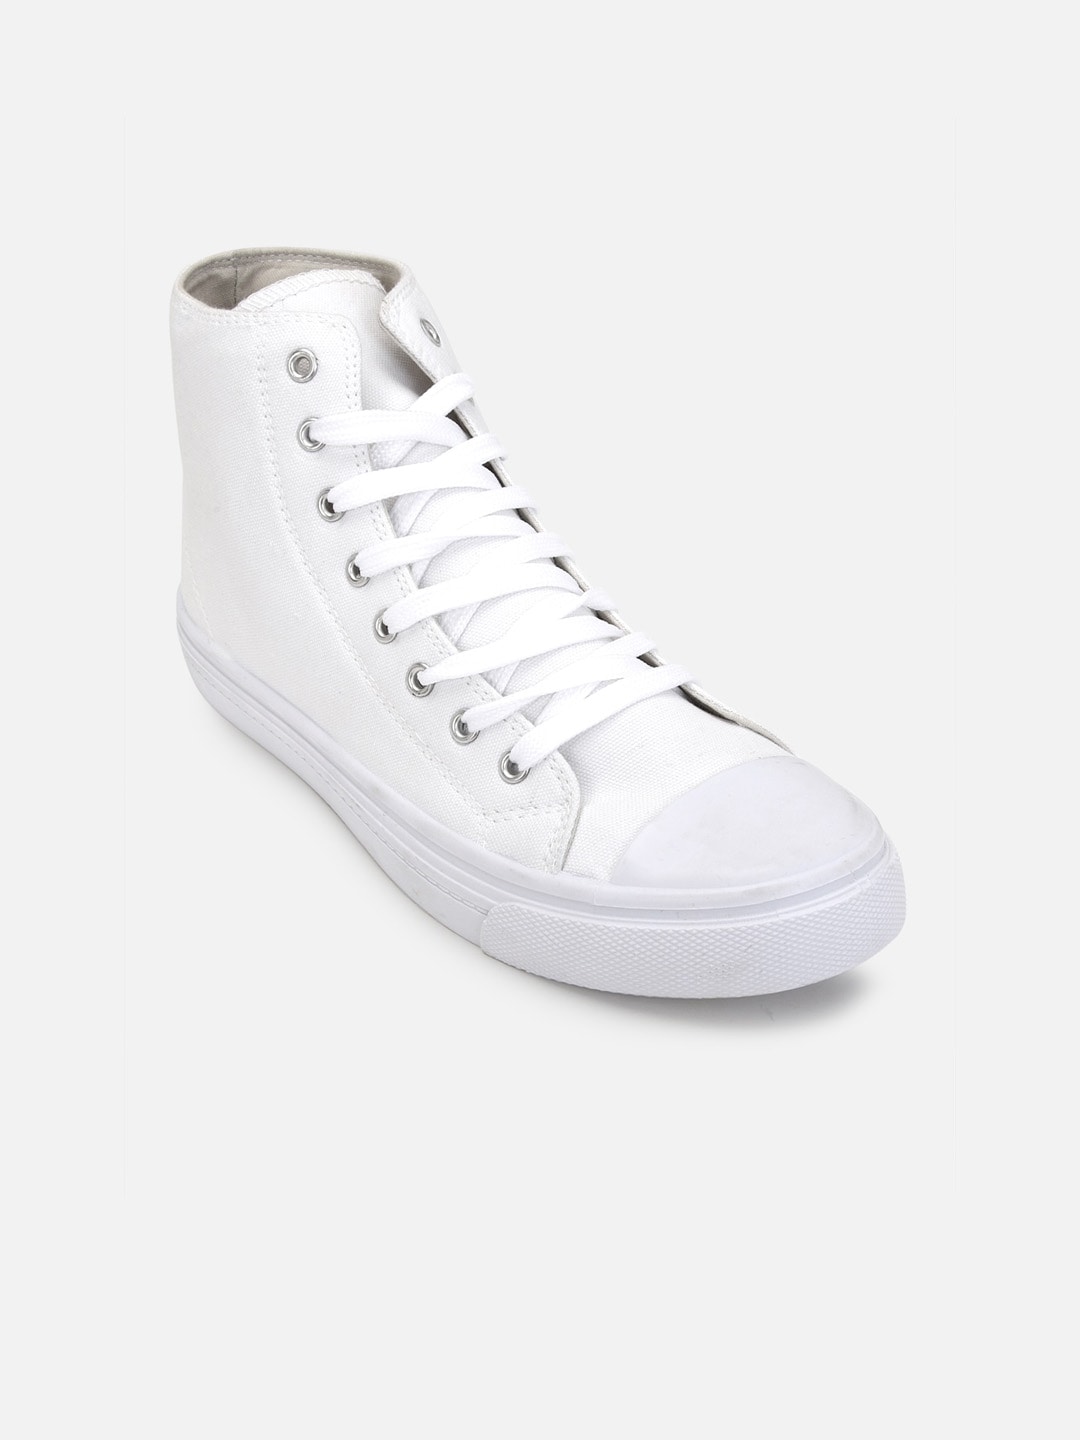 FOREVER 21 Women High-Top Sneakers Price in India